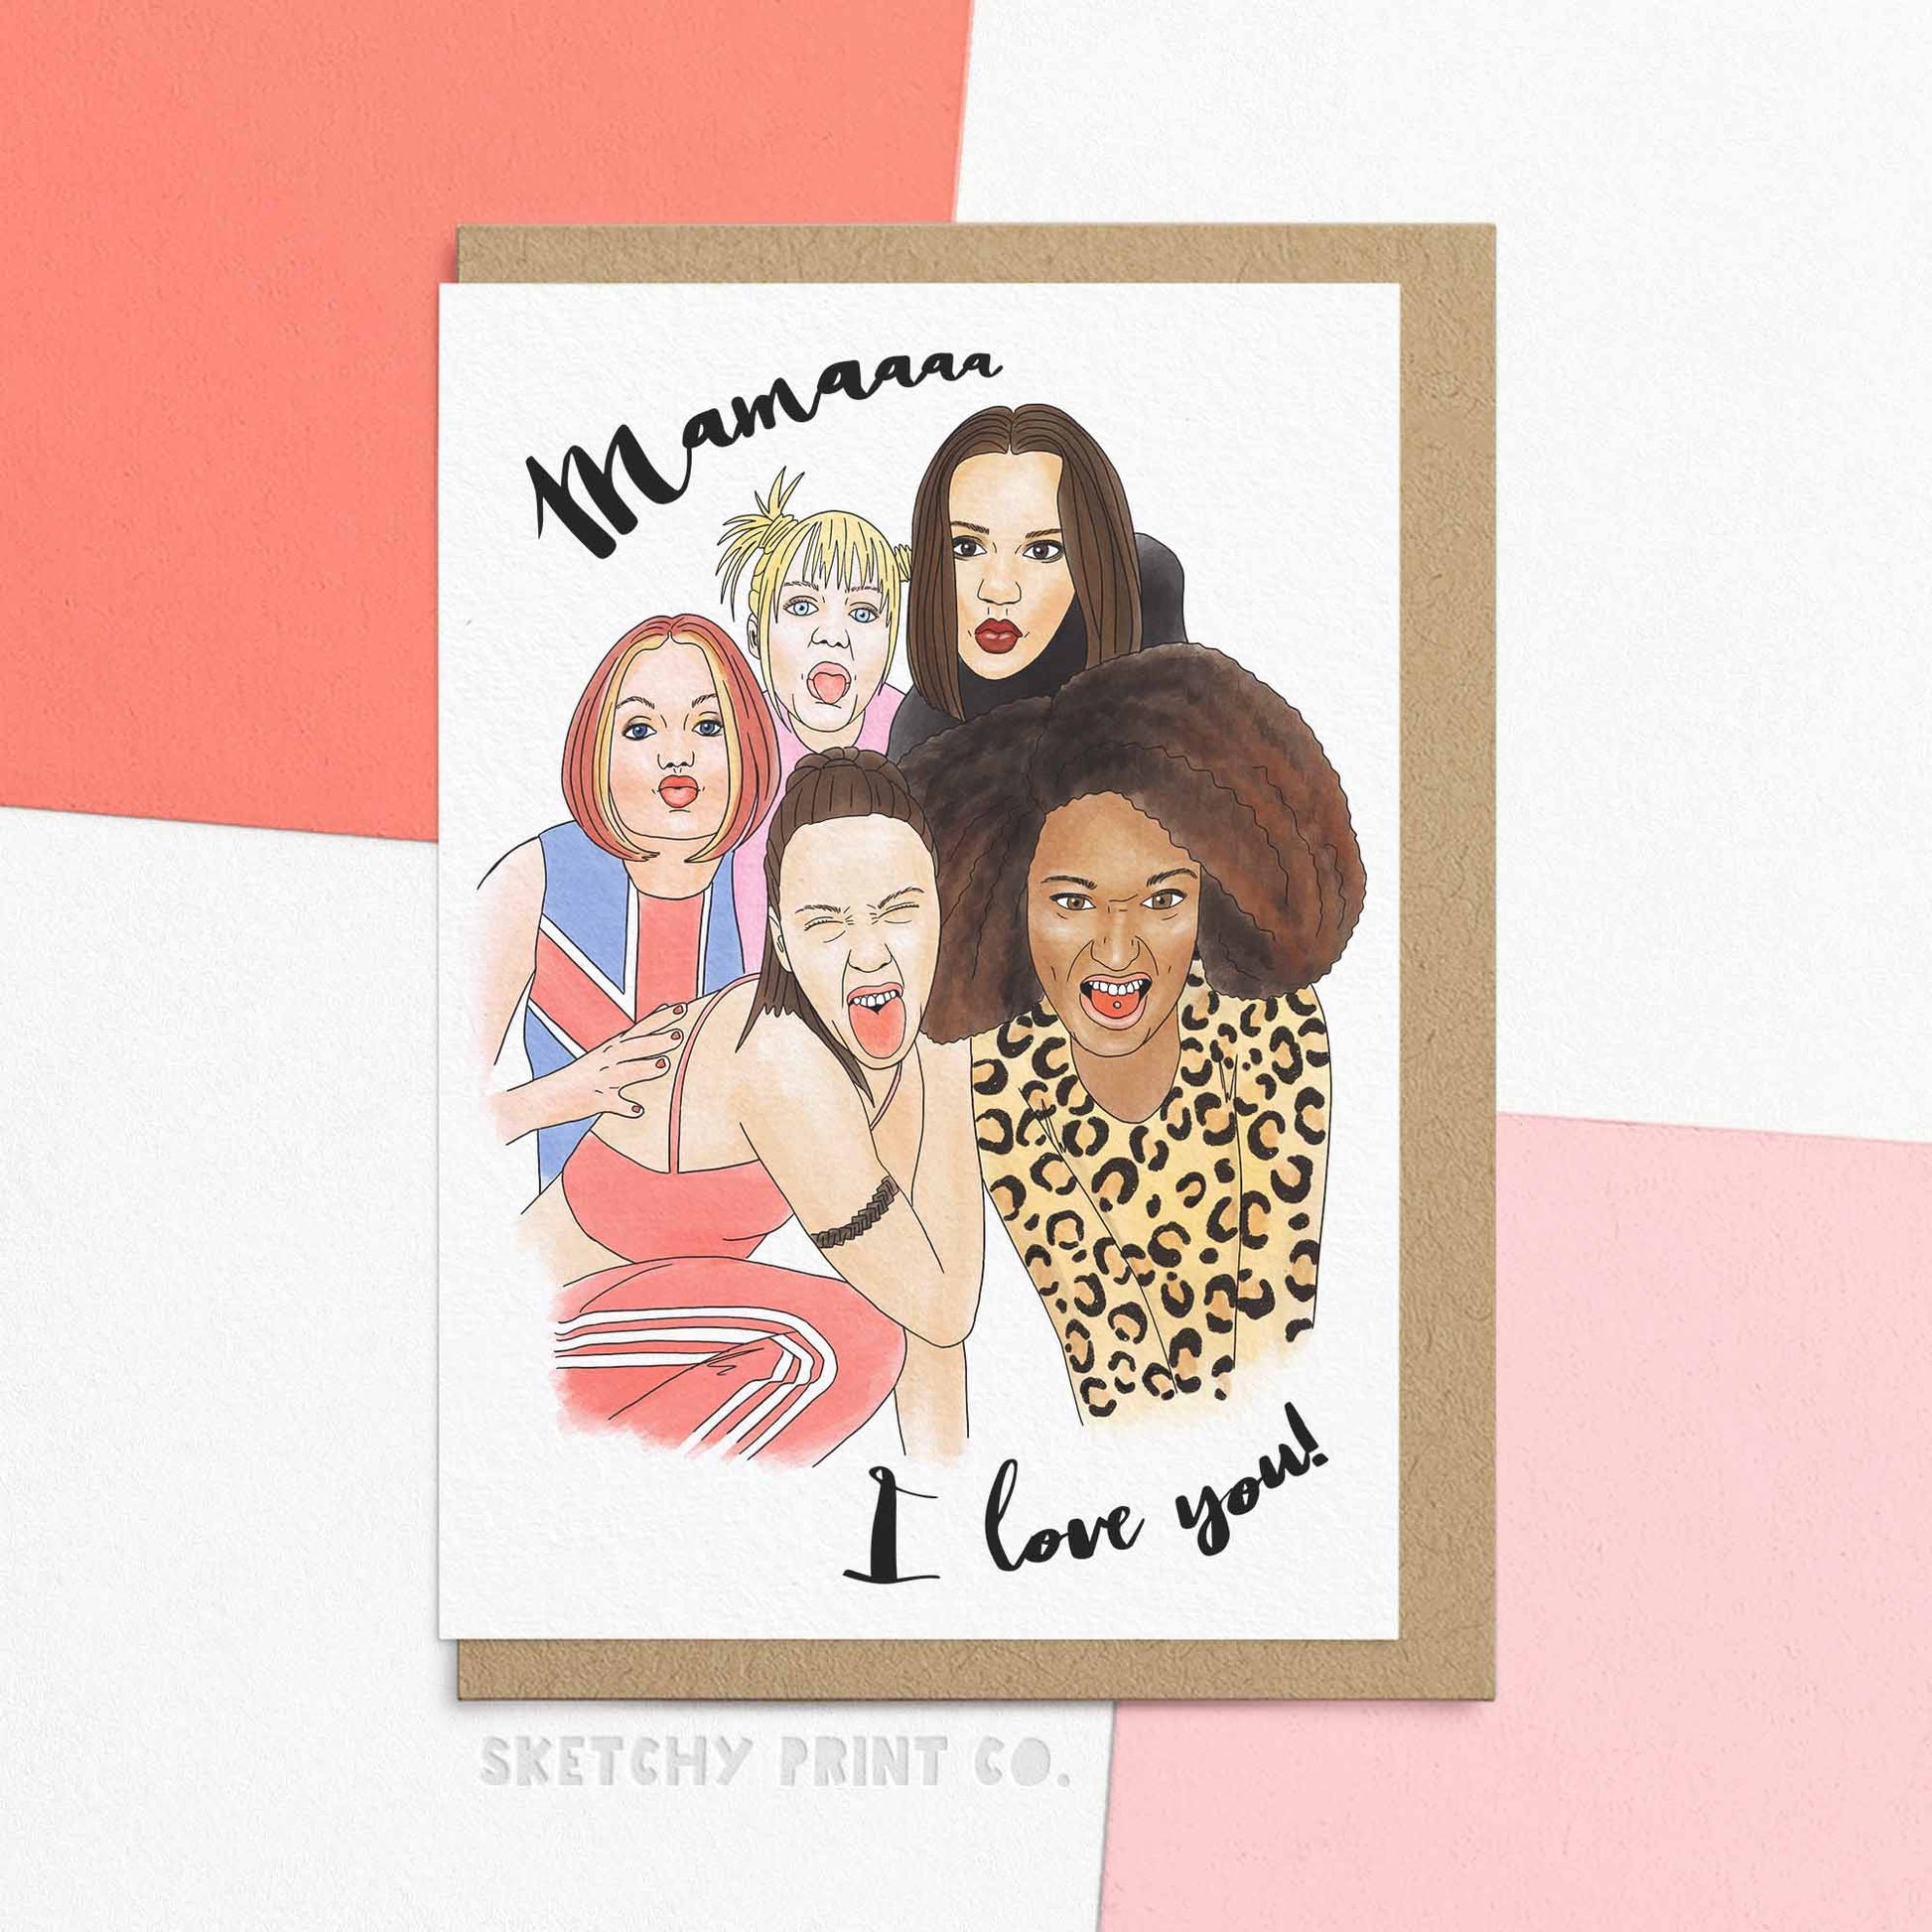 Show your love for mom with our funny Mother's Day card that's perfect for music-loving mums. With a playful nod to the 90s and happy Mother's Day messages printed on sustainable FSC certified paper, it's what she really really wants. Reading "Mama I love you!" by Sketchy Print Co 